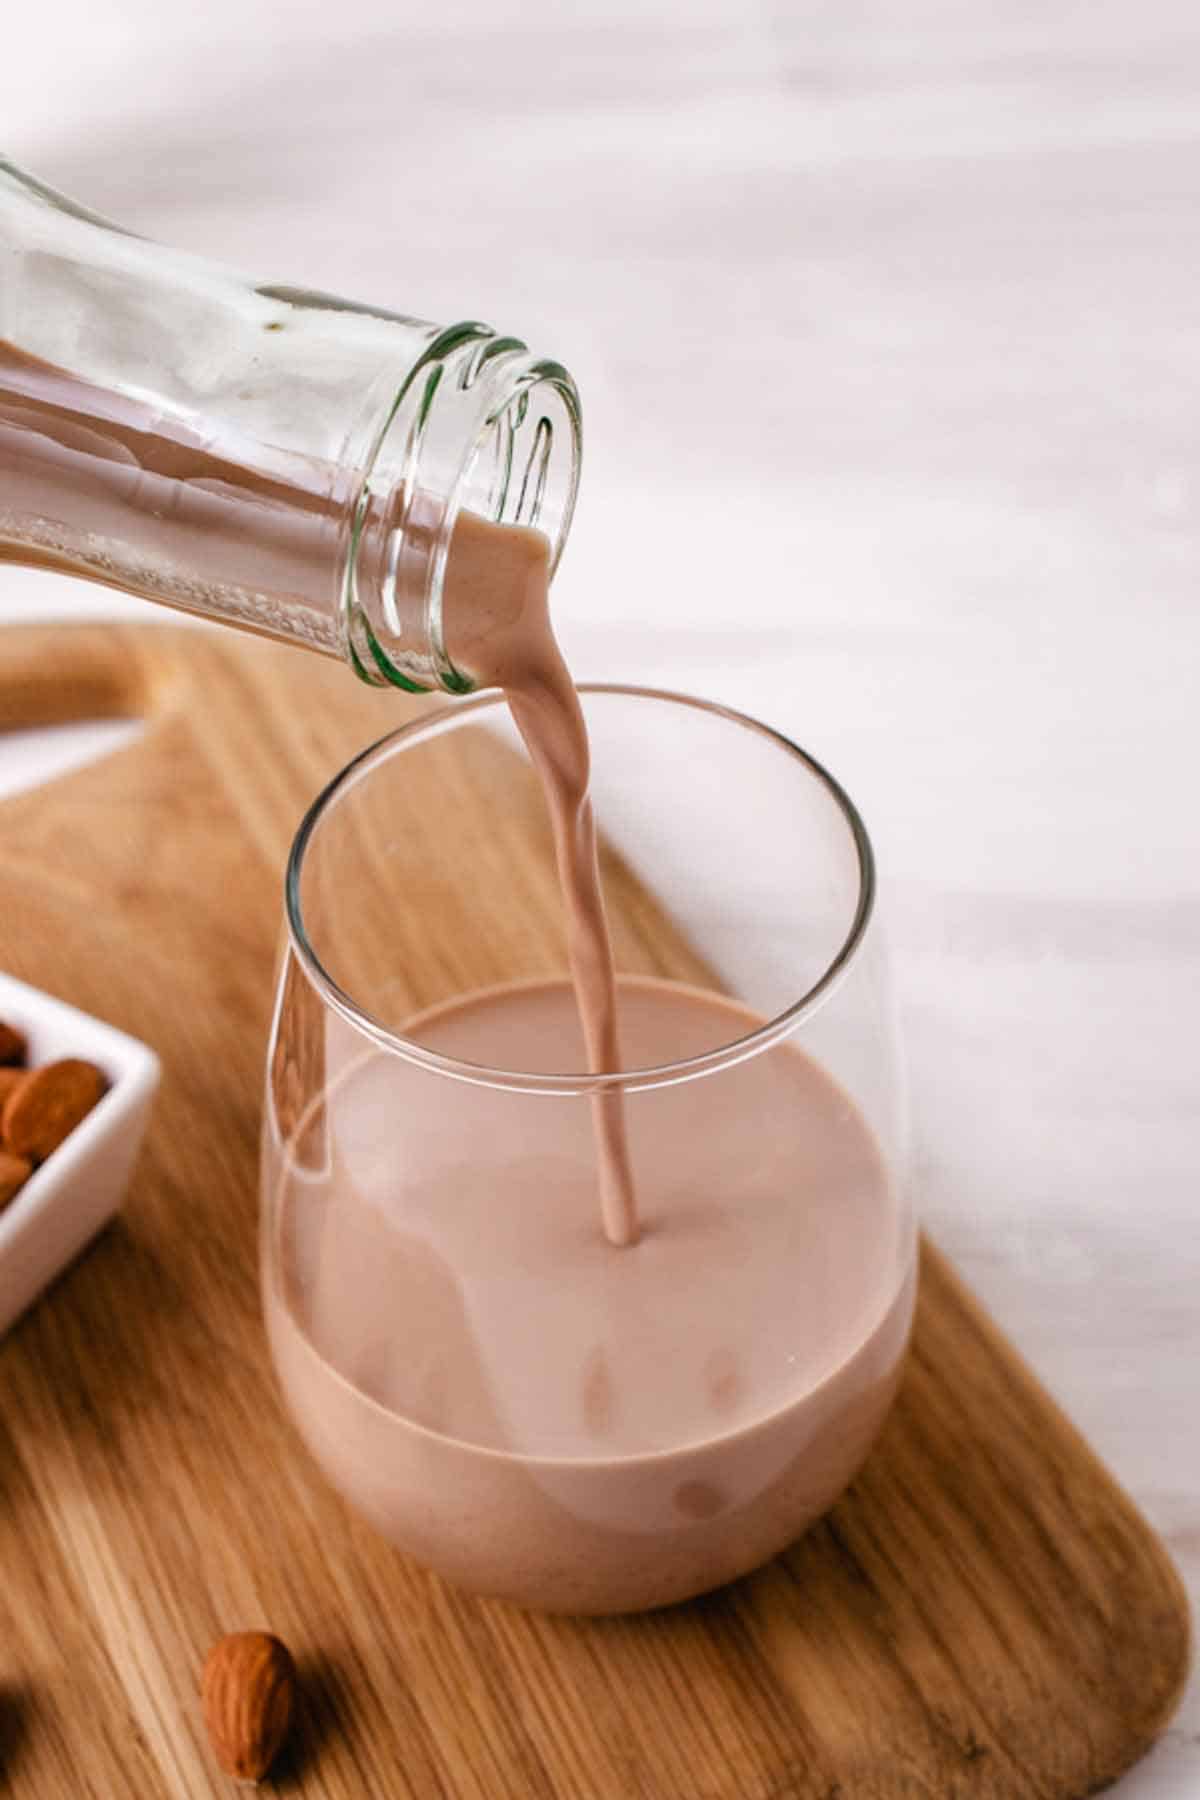 Pouring chocolate almond milk with cocoa powder into a glass.